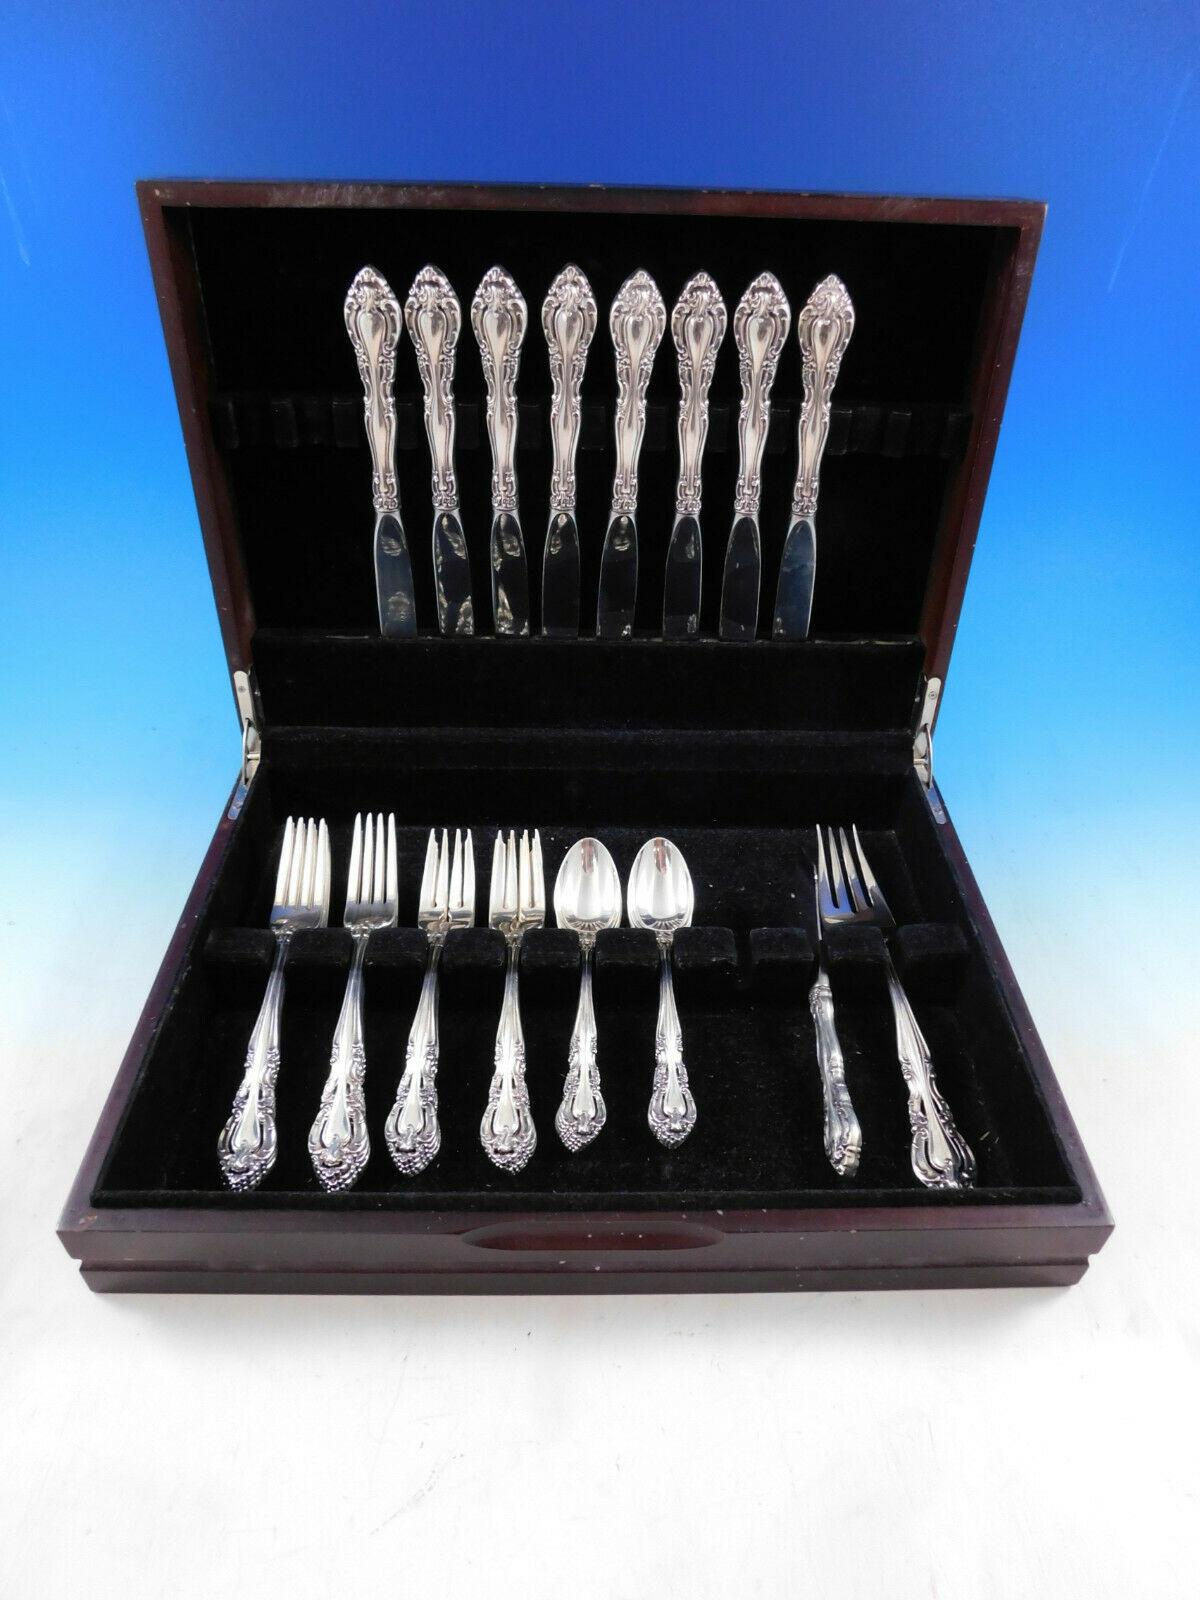 Beautiful Baronial by Gorham, c1973, sterling silver flatware set - 34 pieces. The handles of the forks and spoons are pierced. This set includes:

8 Place Knives, 9 1/8